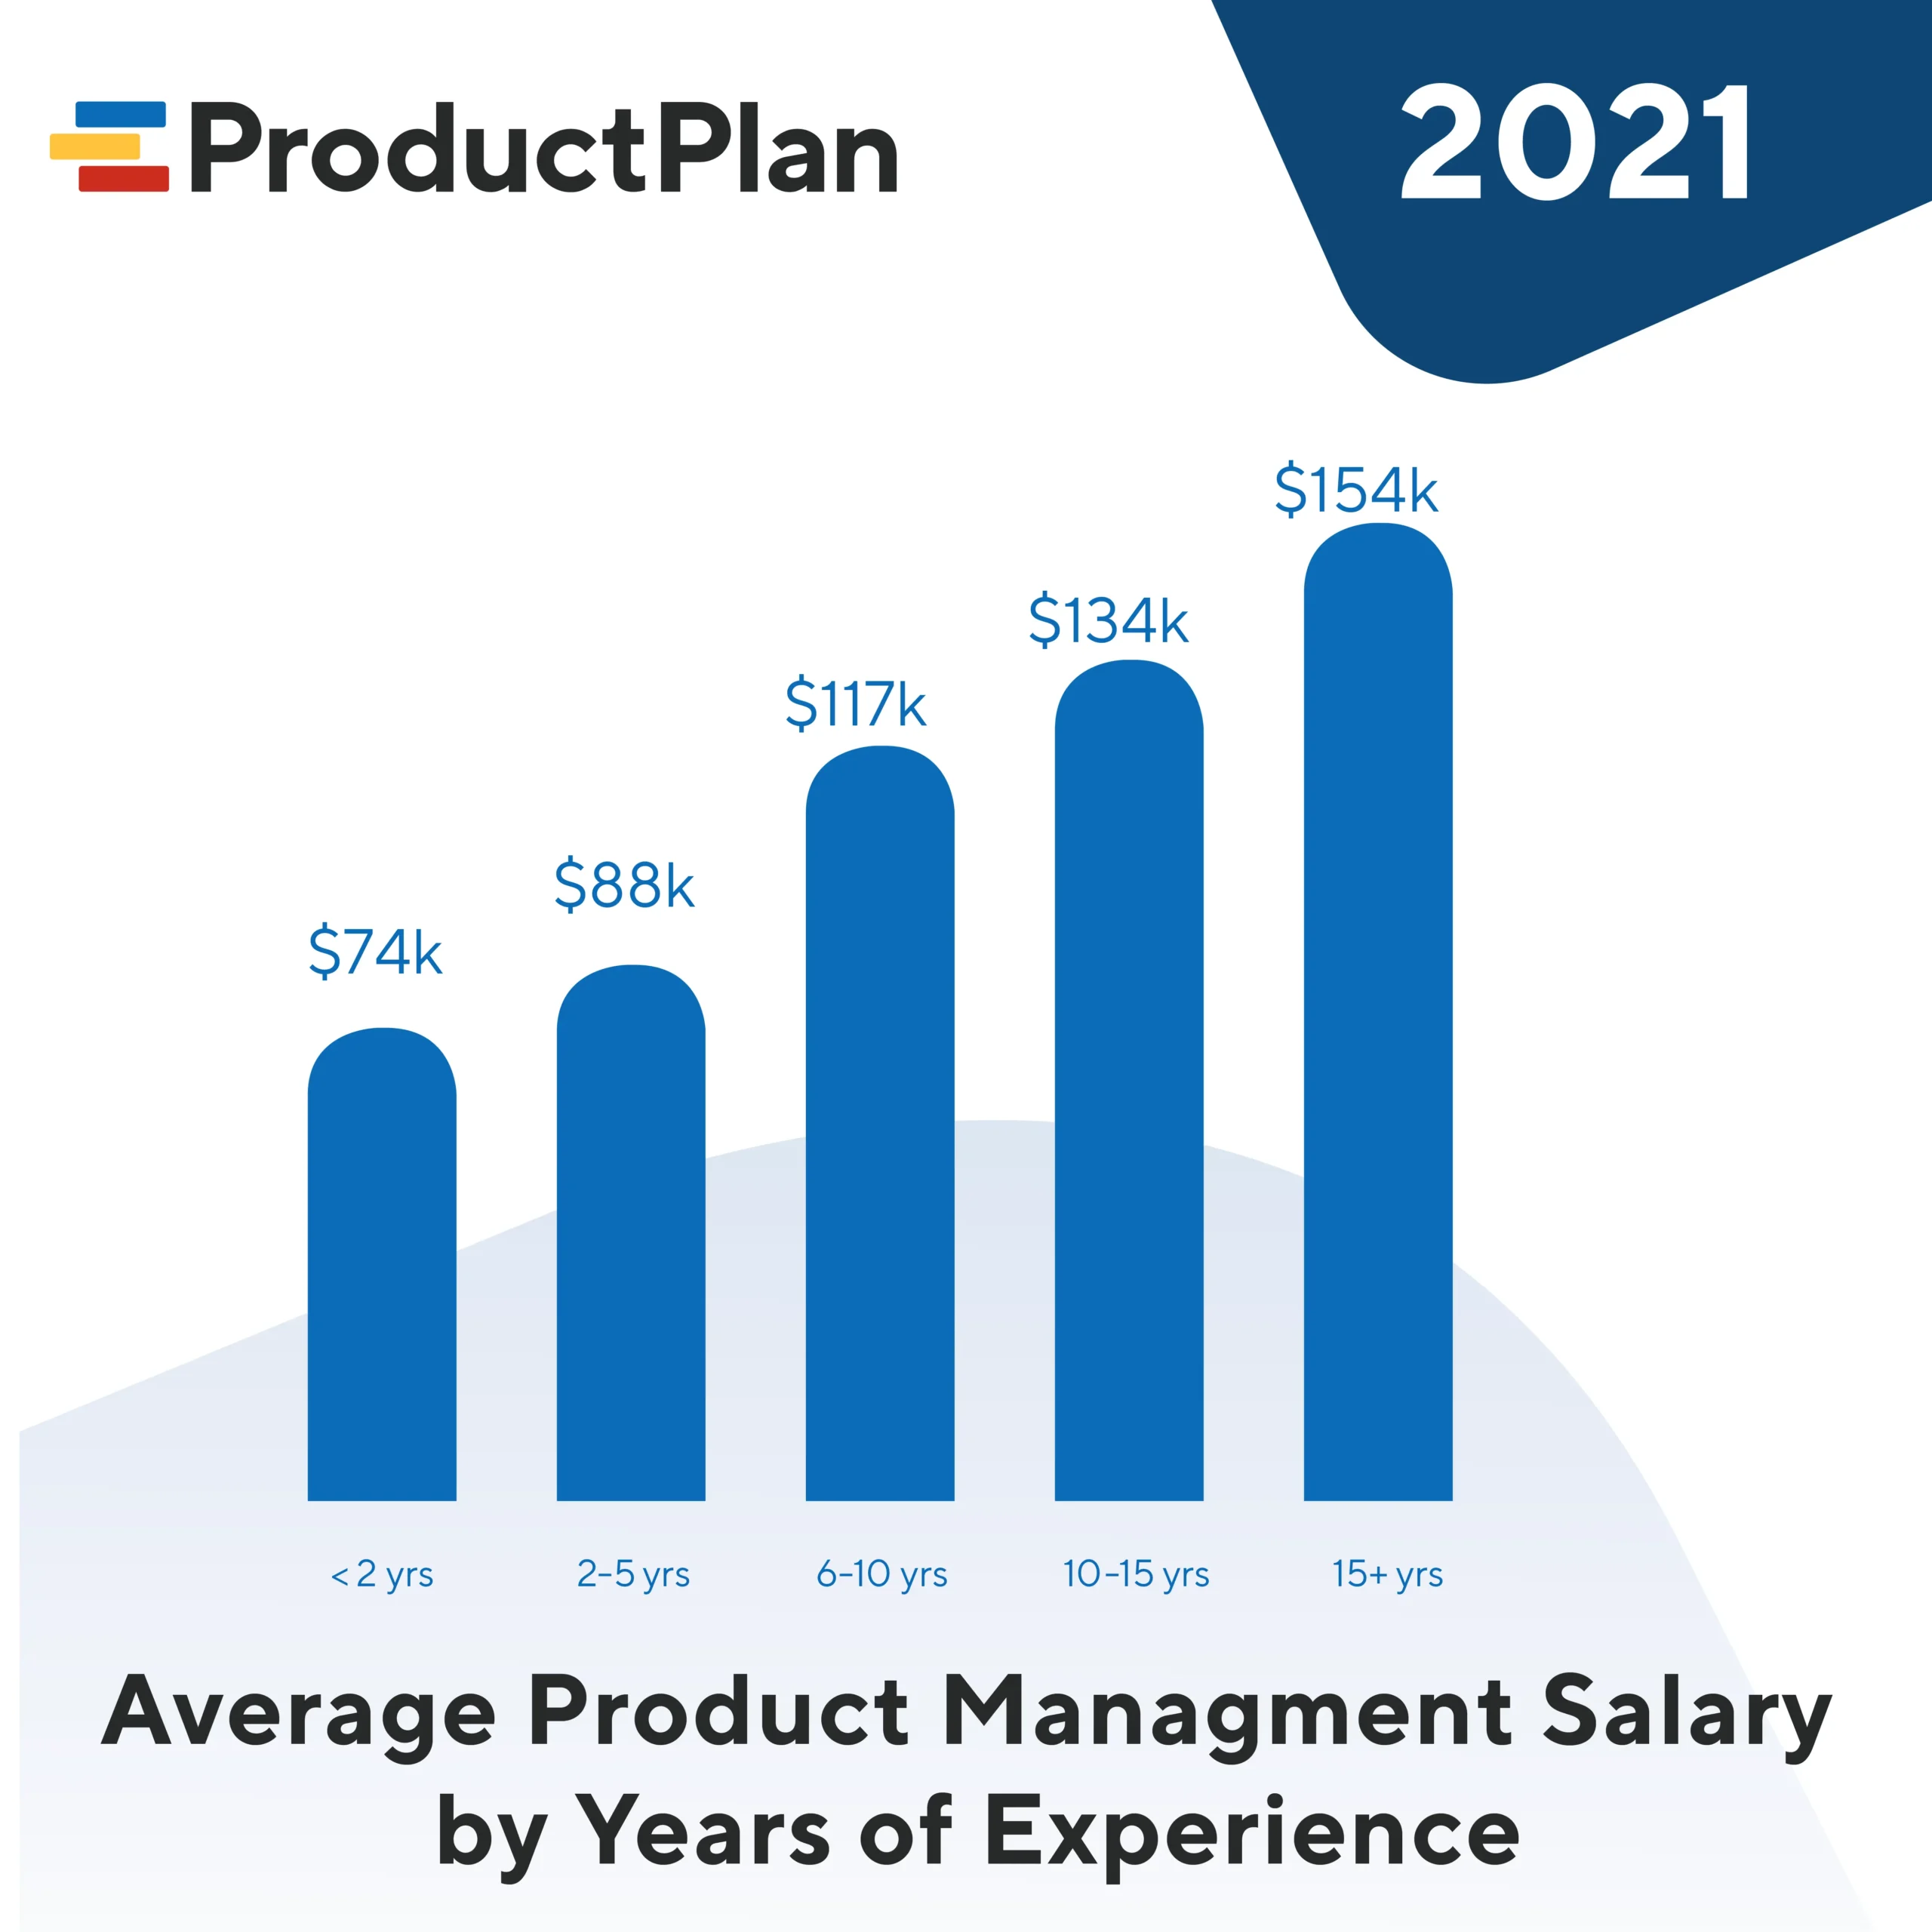 hewlett packard sales manager salary - How much do HP district sales managers make